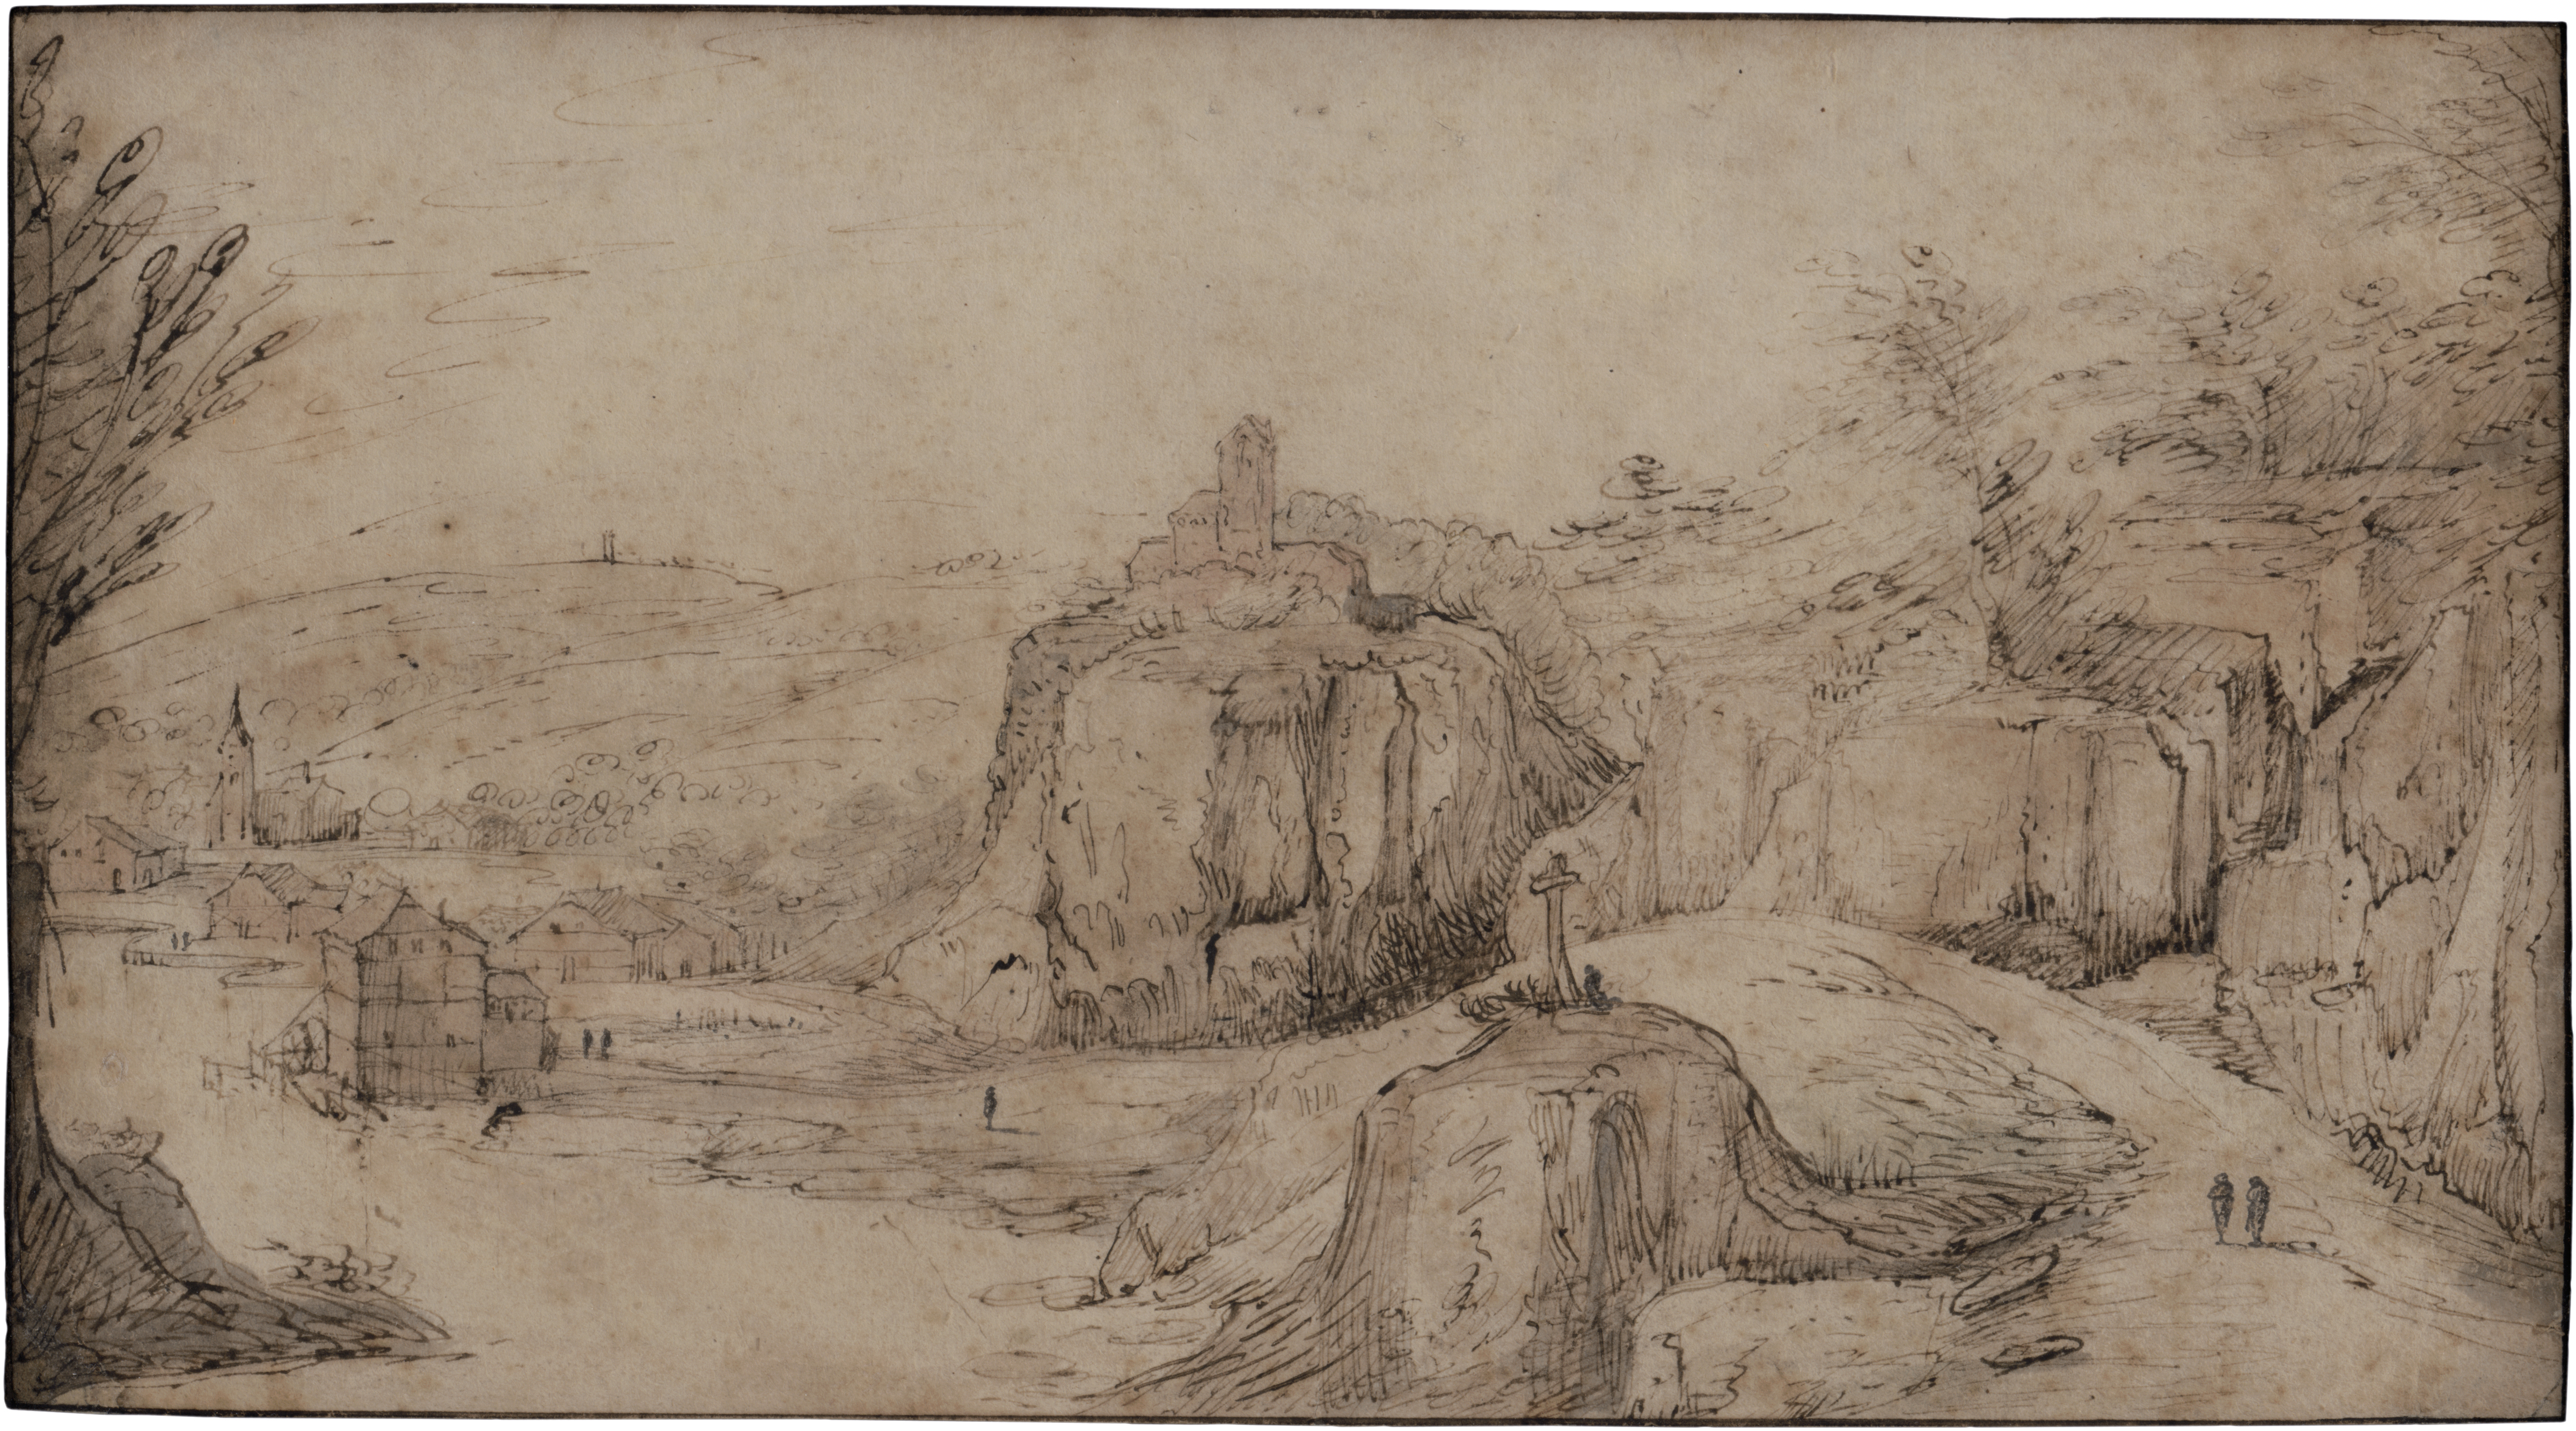 Momper. A Castle on a Rock in a Hilly Landscape